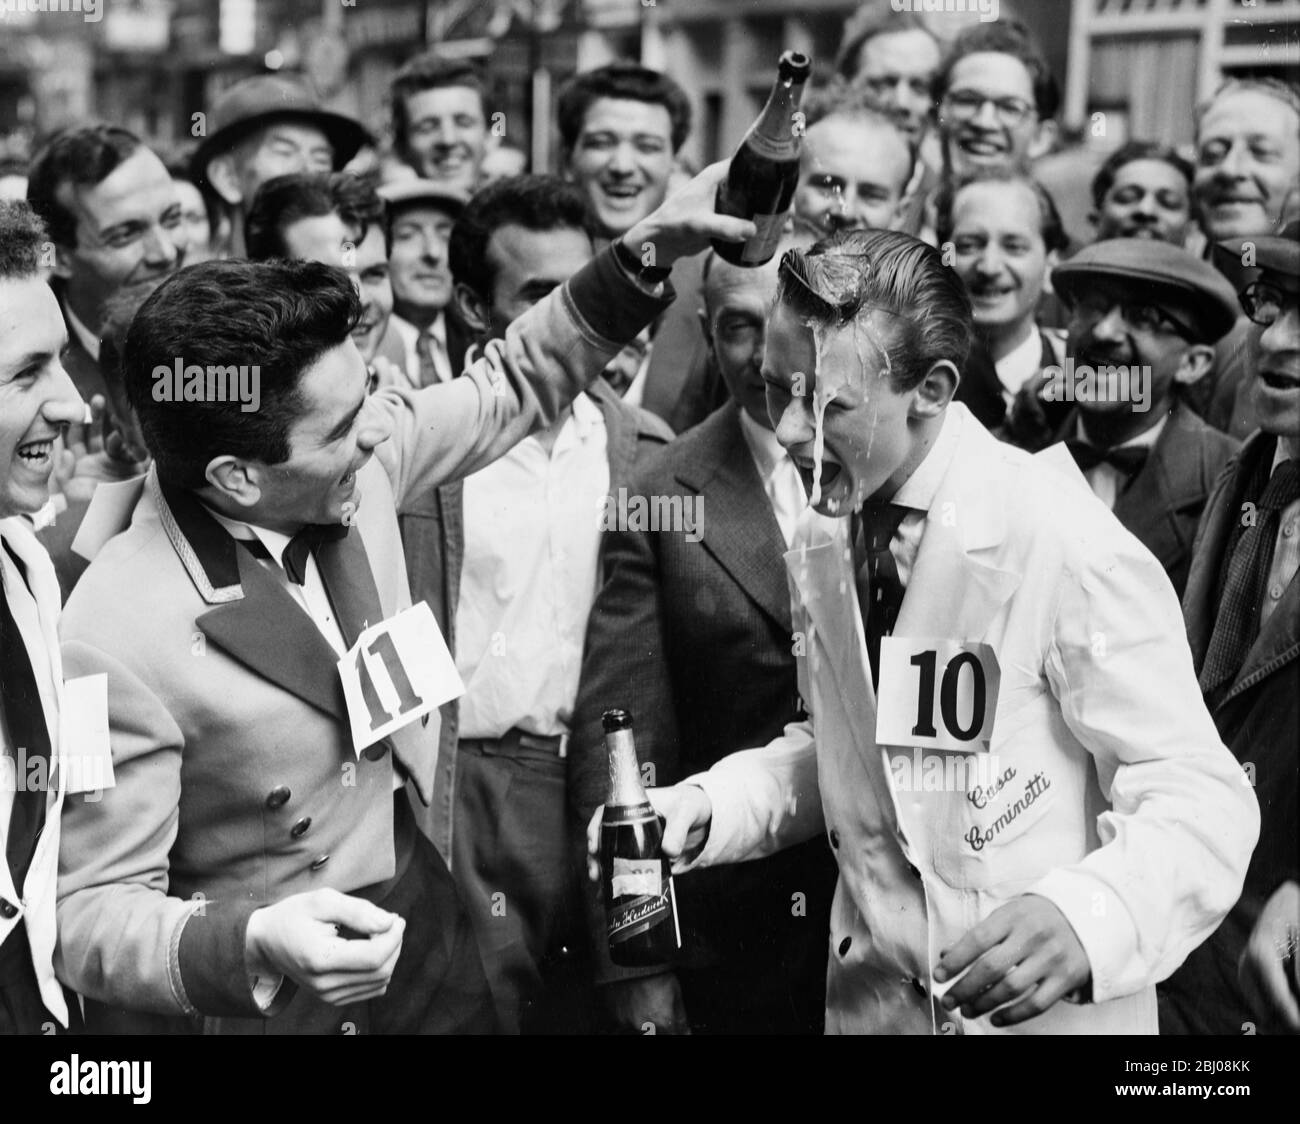 Michael Bushell, the youngest competitor at age 15, is splashed with champagne by second place Guido Adorne, after winning the Soho Fair waiters' race from Soho Square to Greek Street whilst carrying a tray with half a bottle of wine, a glass and an ash tray. Soho, London, England. - 13 July 1958 Stock Photo